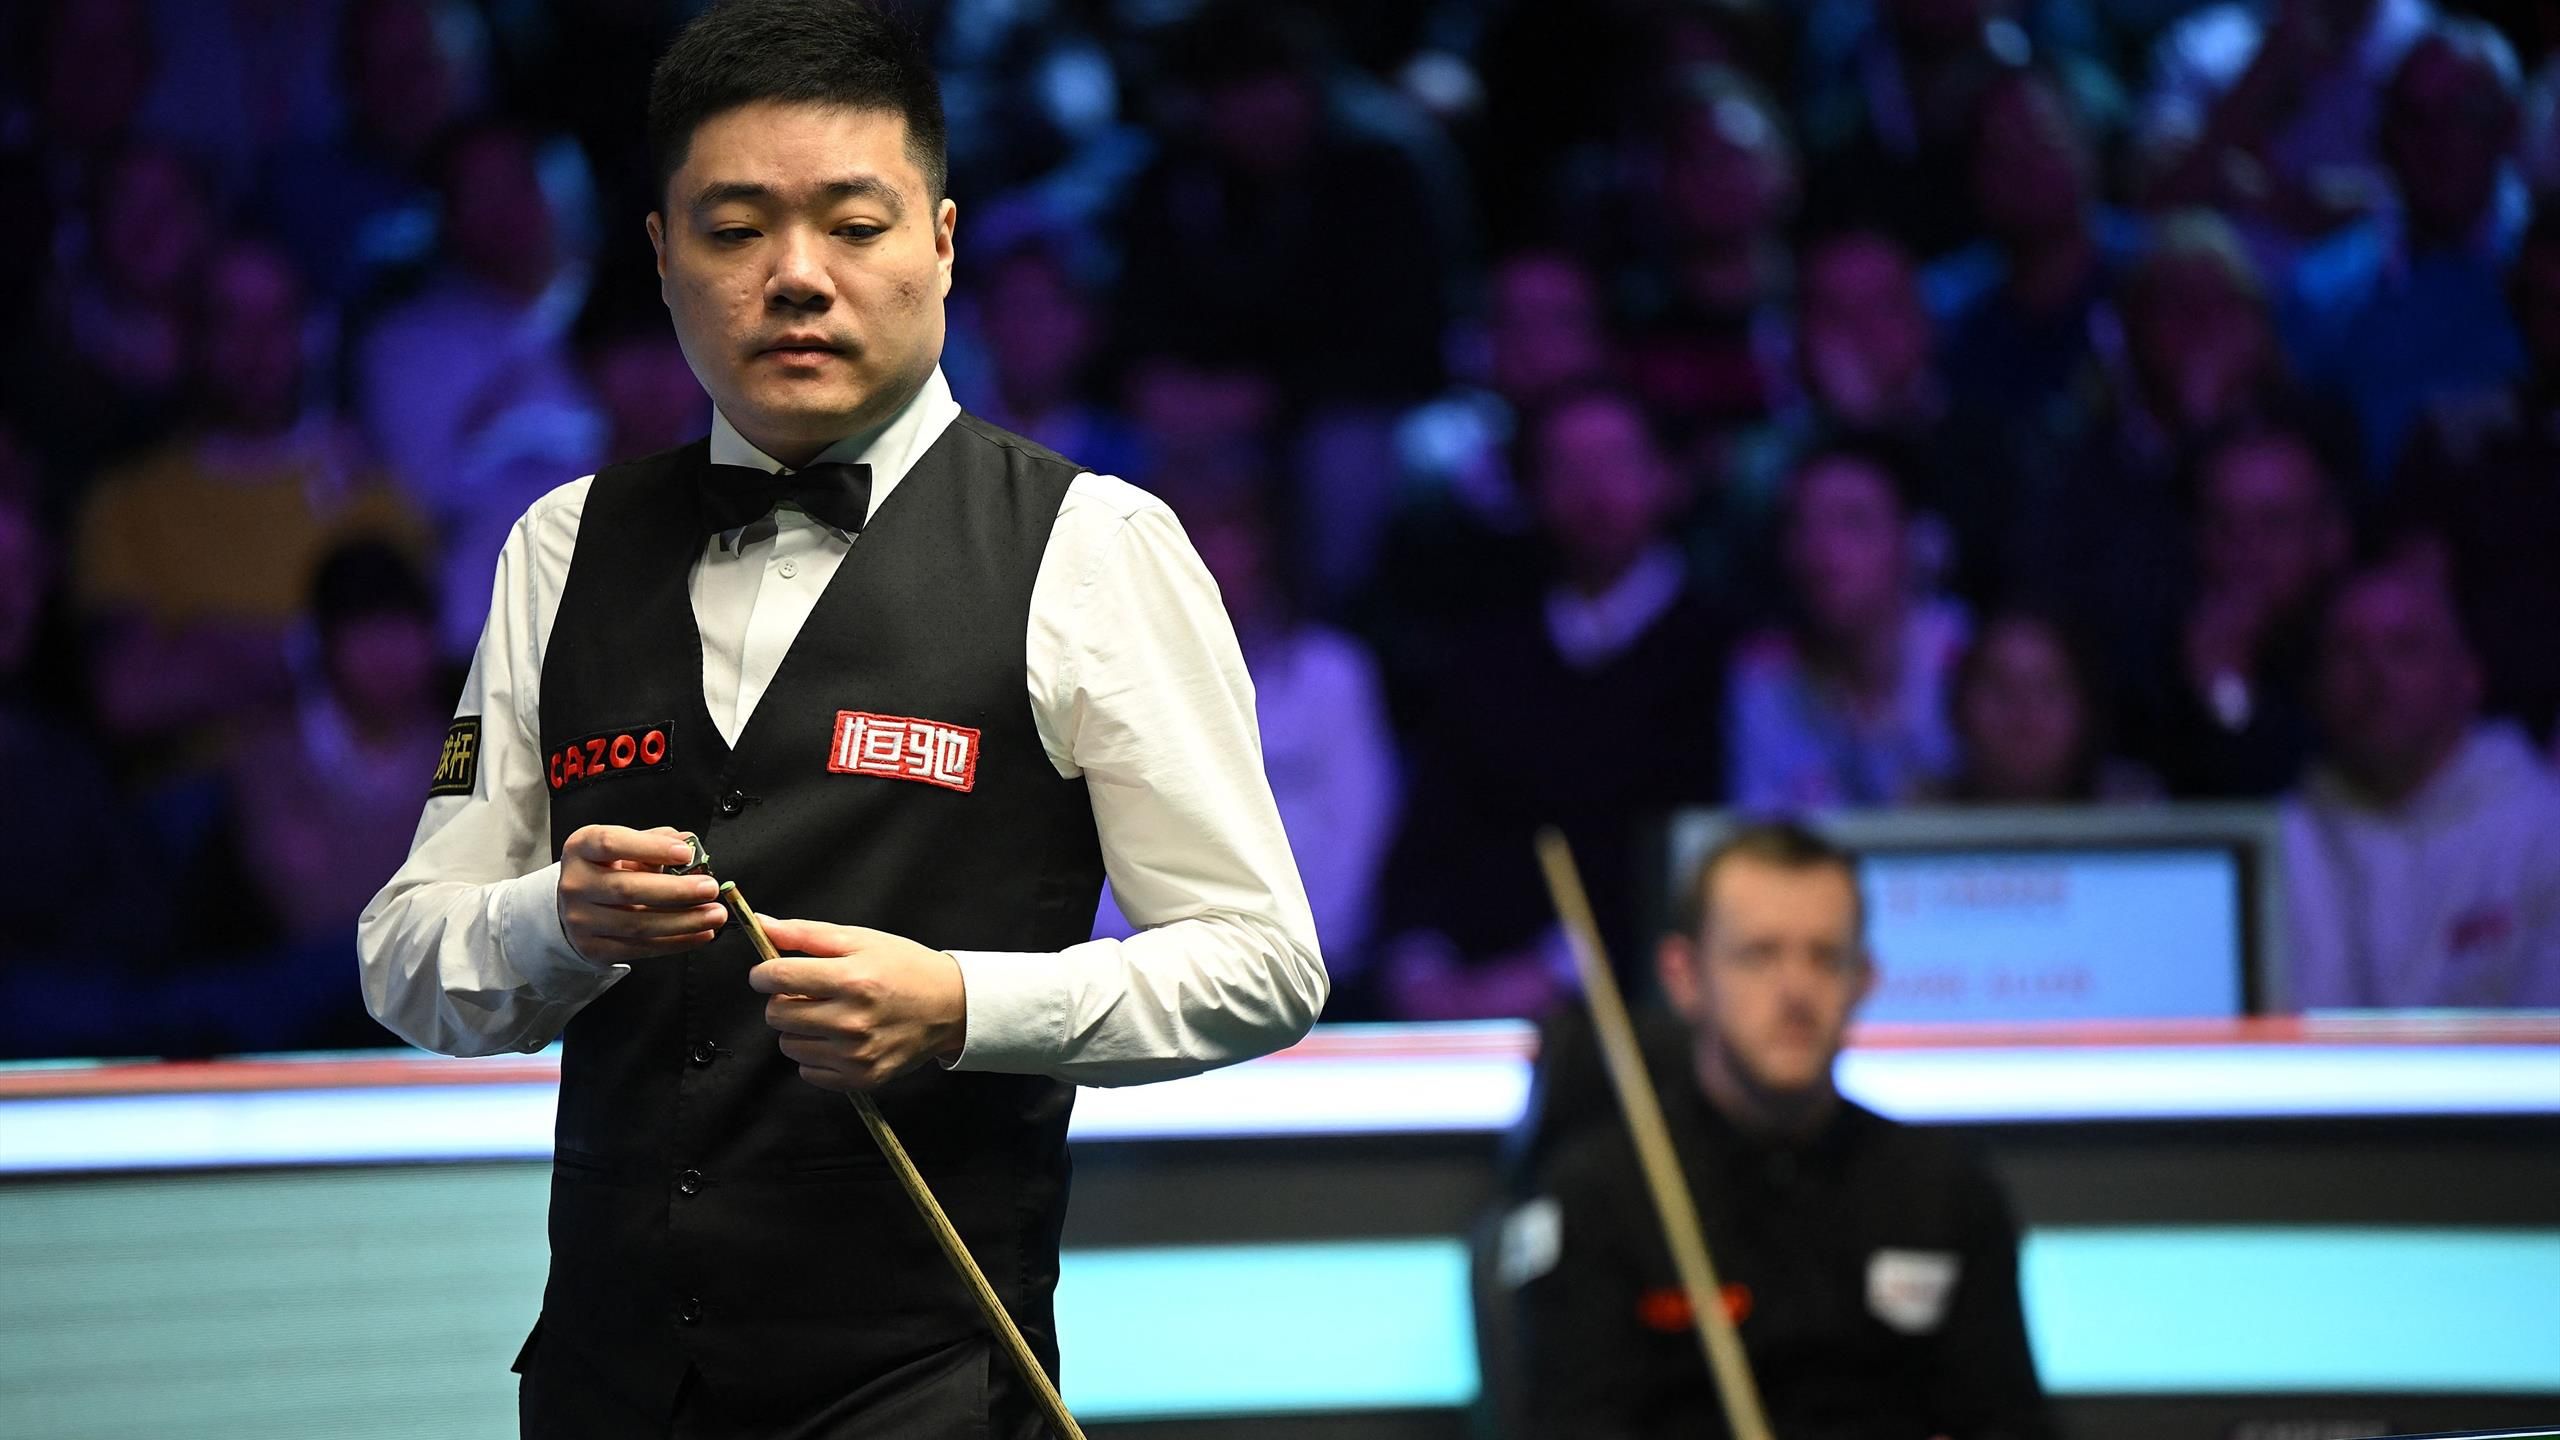 Ding Junhui four frames from victory after dominating first session with Mark Allen in UK Championship final